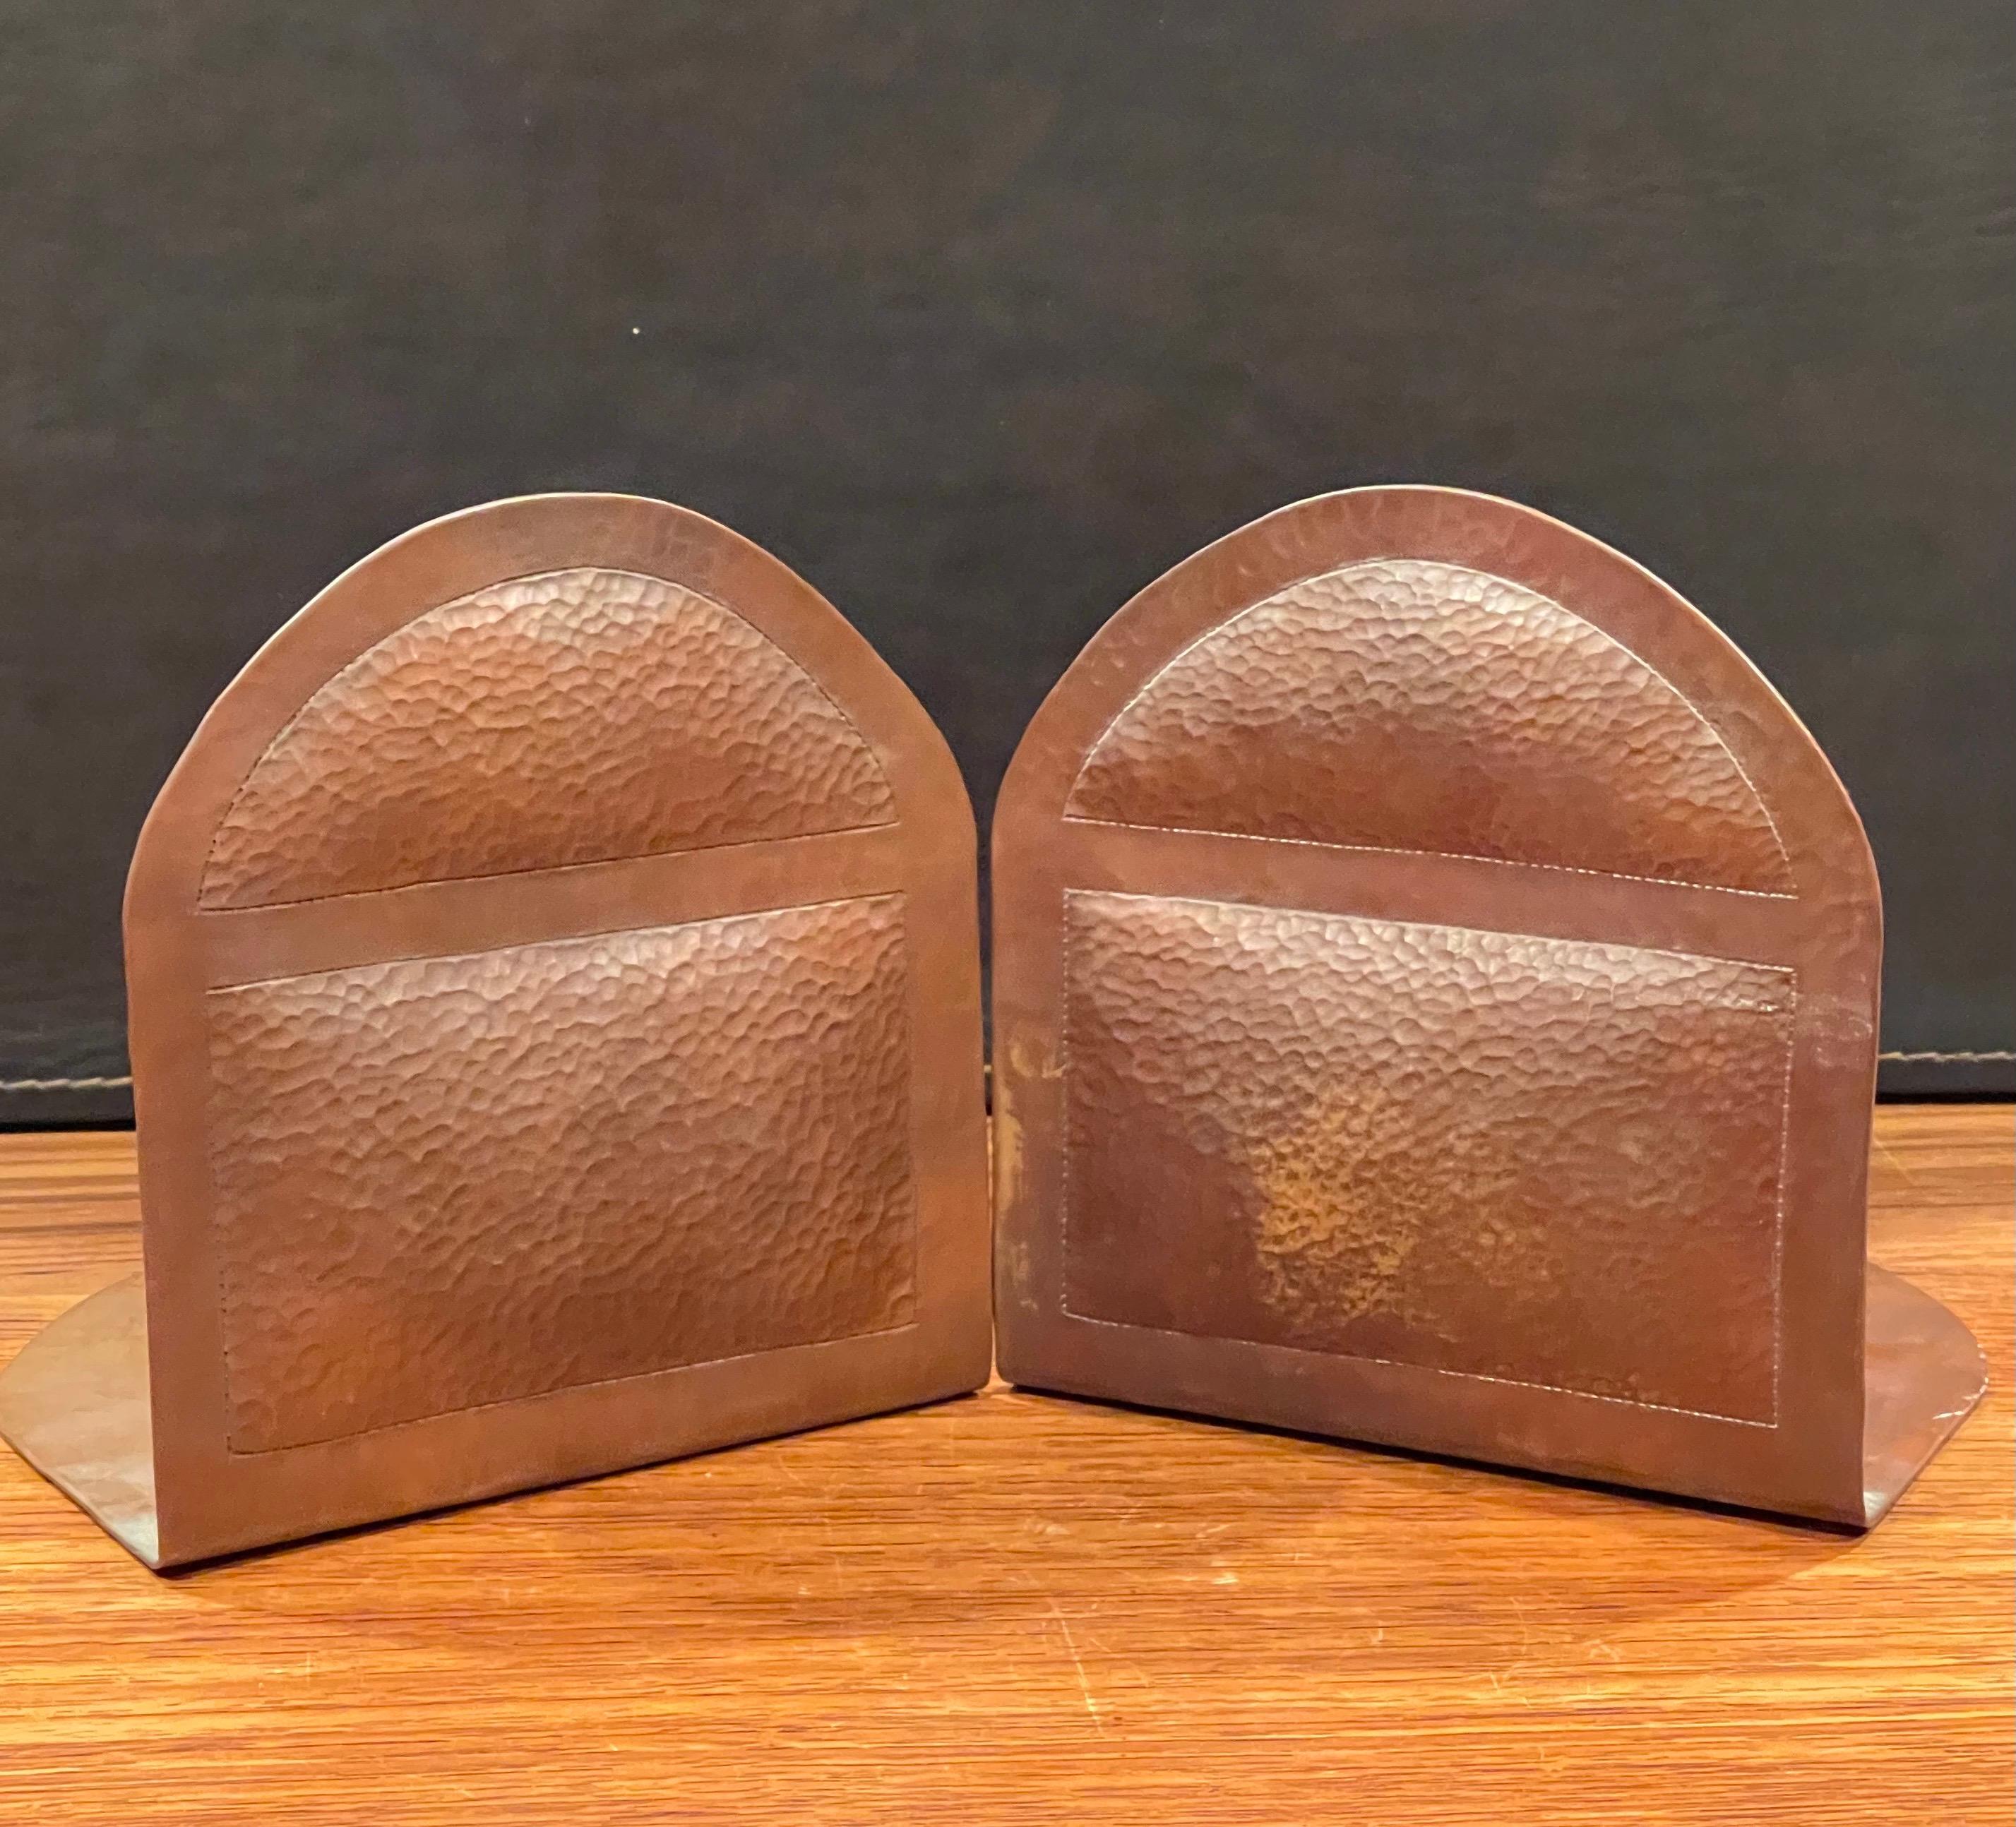 Pair of hand hammered copper Arts & Crafts style bookends by Ramiro M., circa 1980s. The pair are in very good vintage condition and have a simple arch design and a wonderful patina. Each bookend measures 5.75